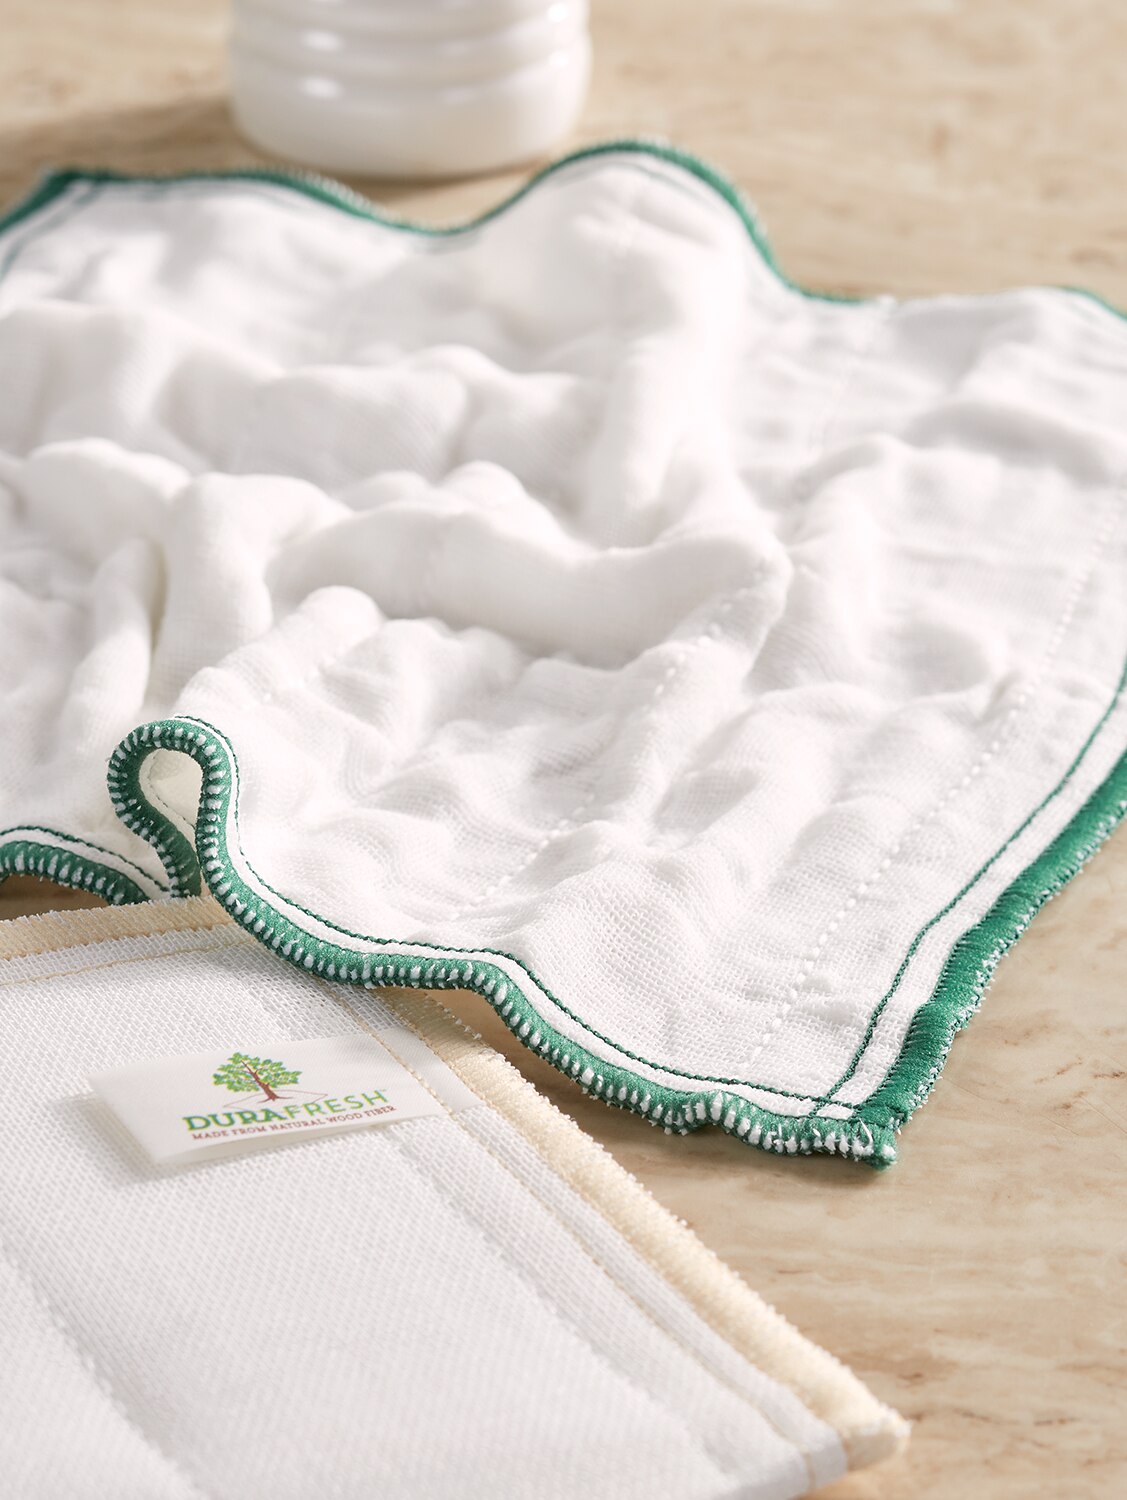 Cleaning product:Reusable Cleaning Cloths